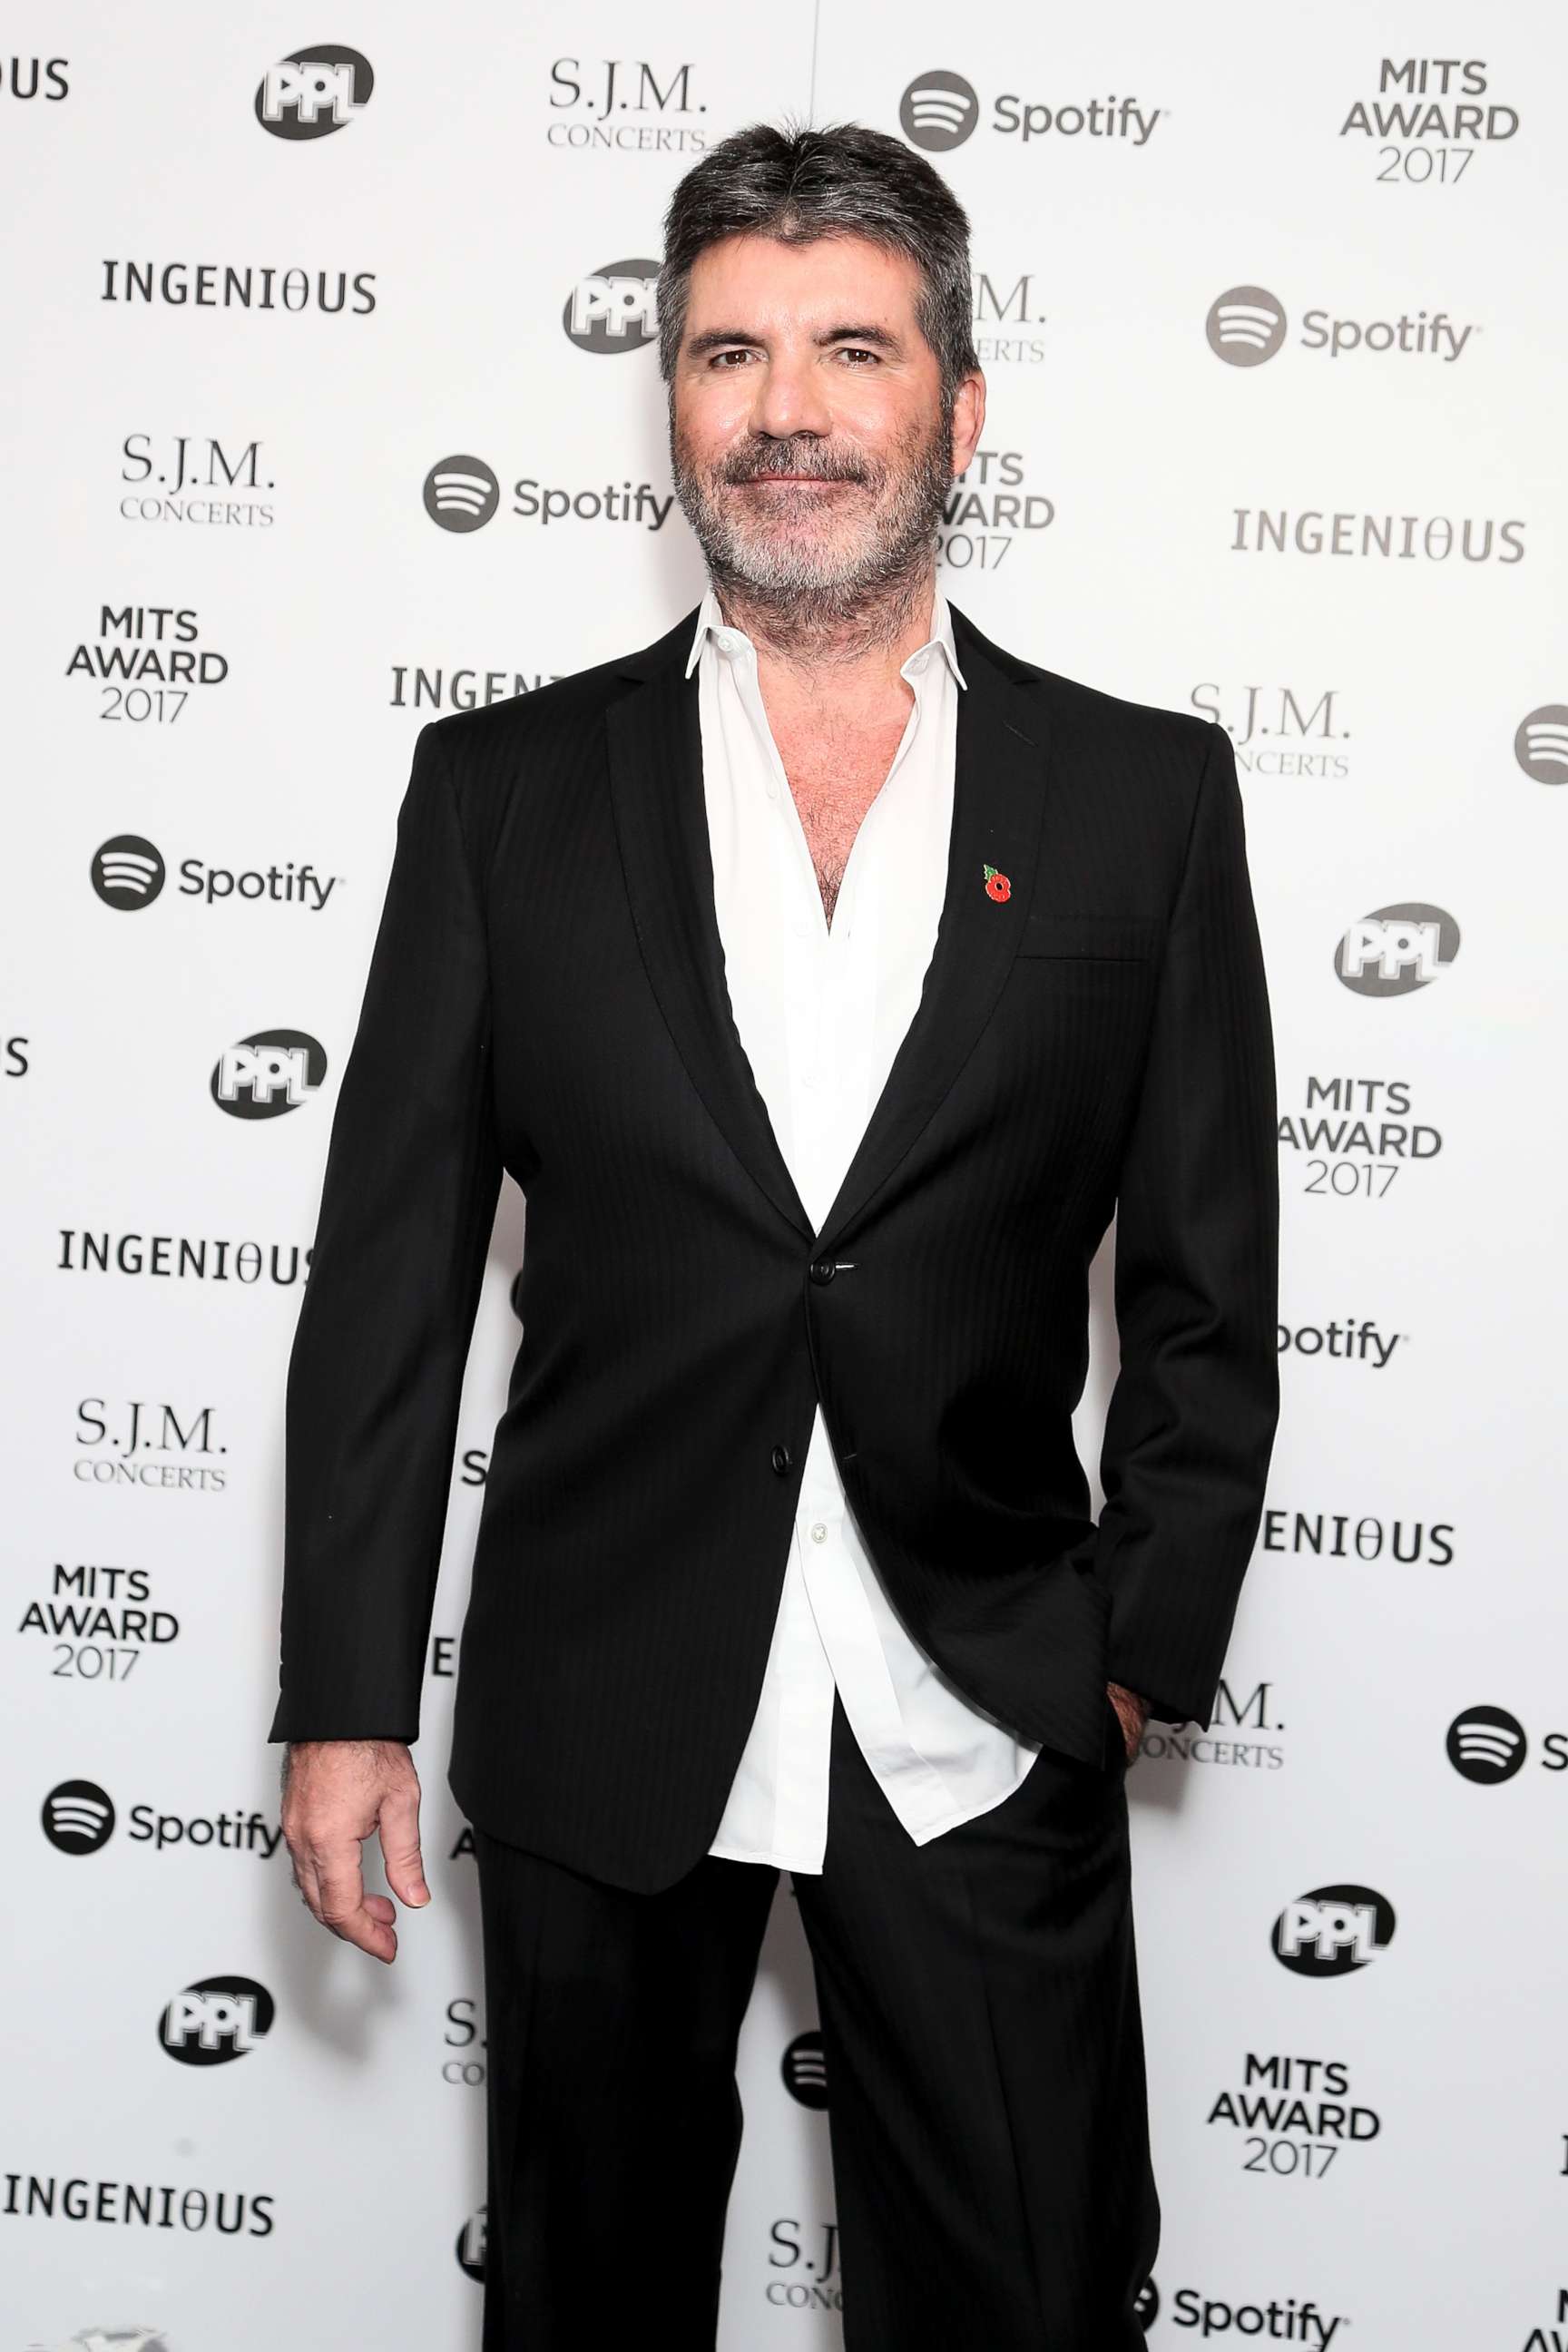 PHOTO: Simon Cowell attends the 26th annual Music Industry Trust Awards held at The Grosvenor House Hotel on Nov. 6, 2017, in London, England.